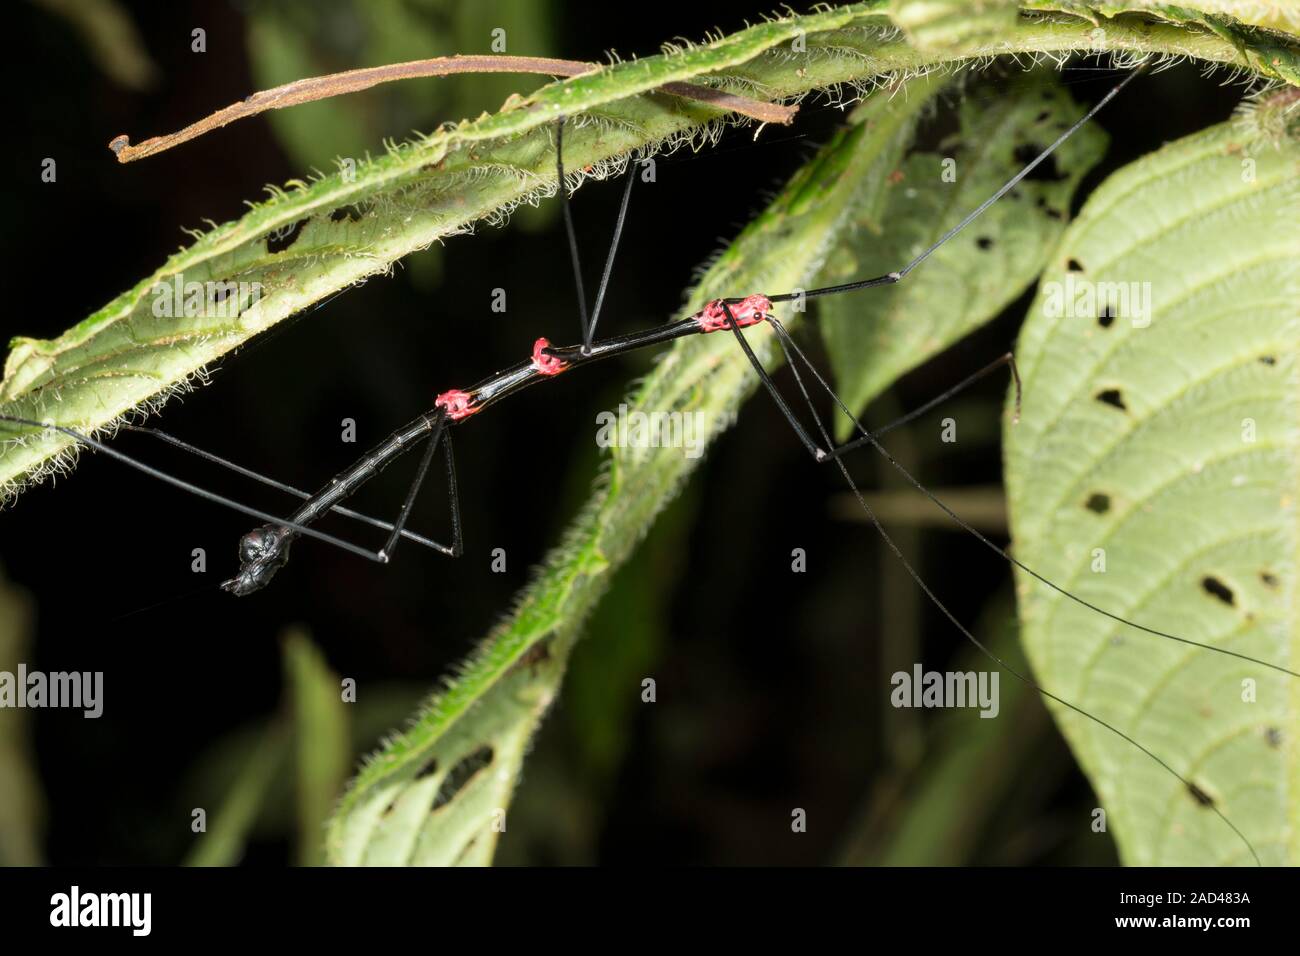 Stick insect (Oreophoetes peruana) with red aposematic or warning colouration, indicating this species is distasteful or poisonous to predators. Photo Stock Photo